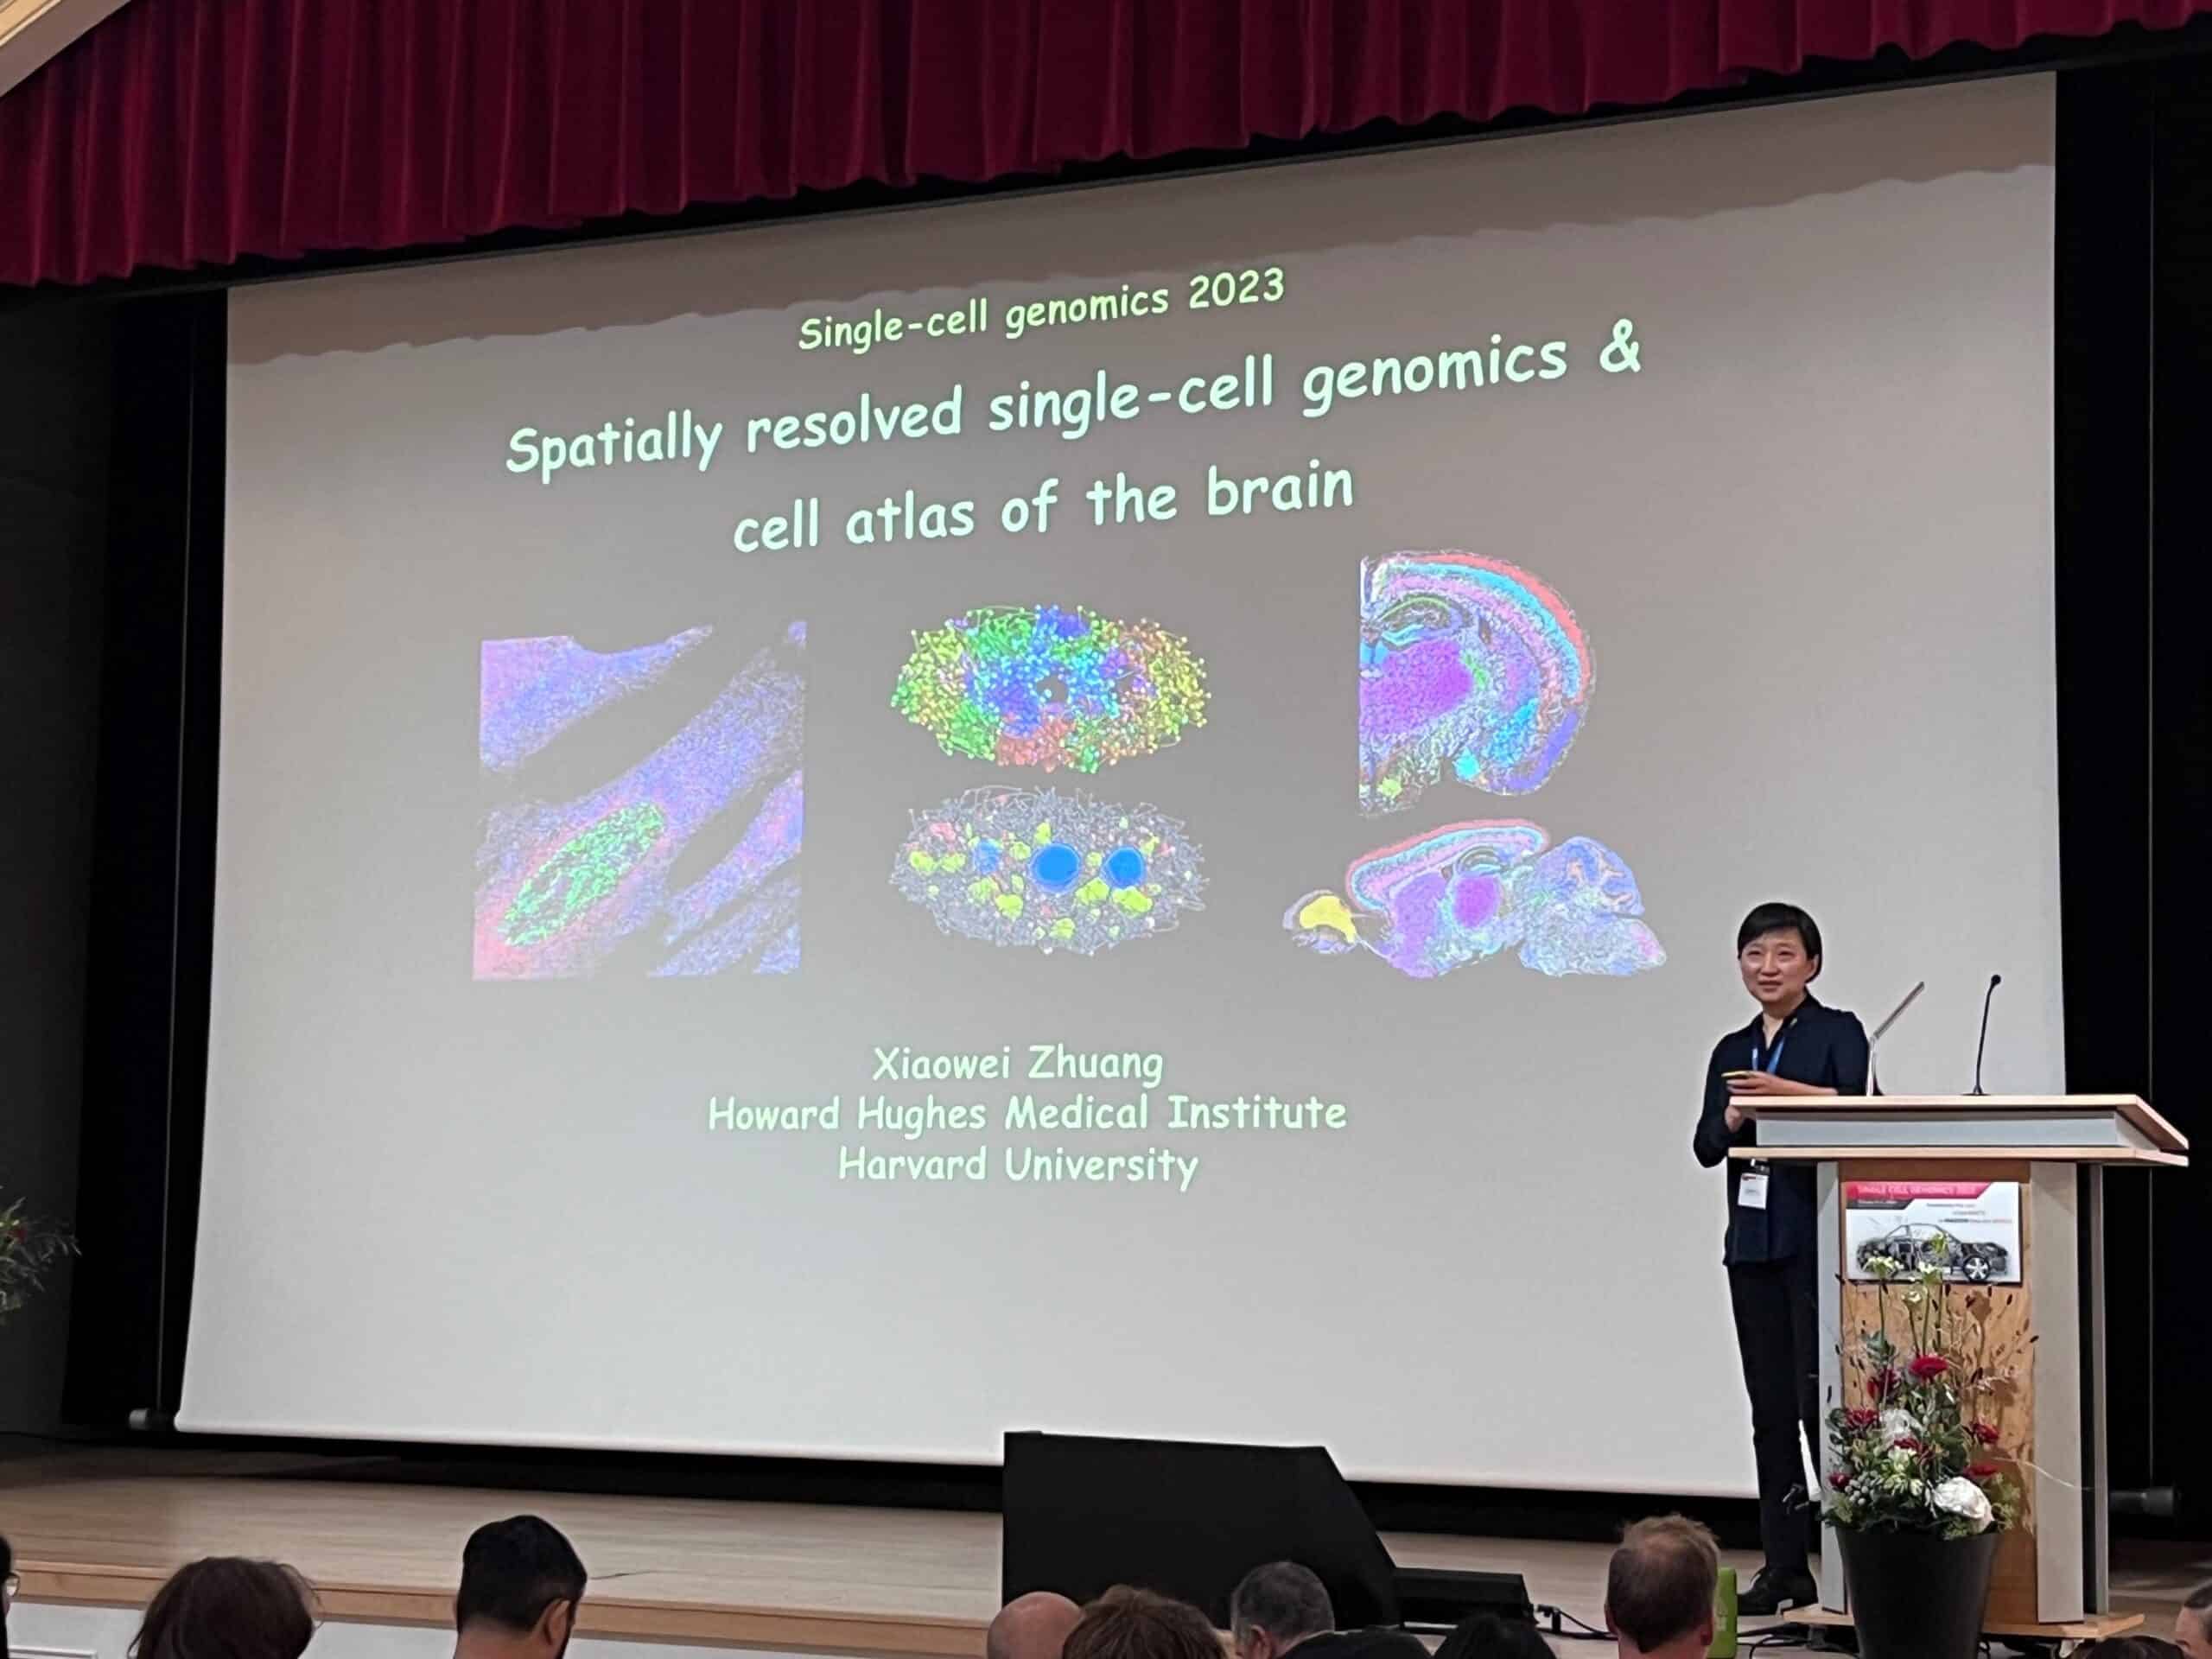 Dr. Xiaowei Zhuang, inventor of MERFISH presenting at the Single Cell Genomics Event.